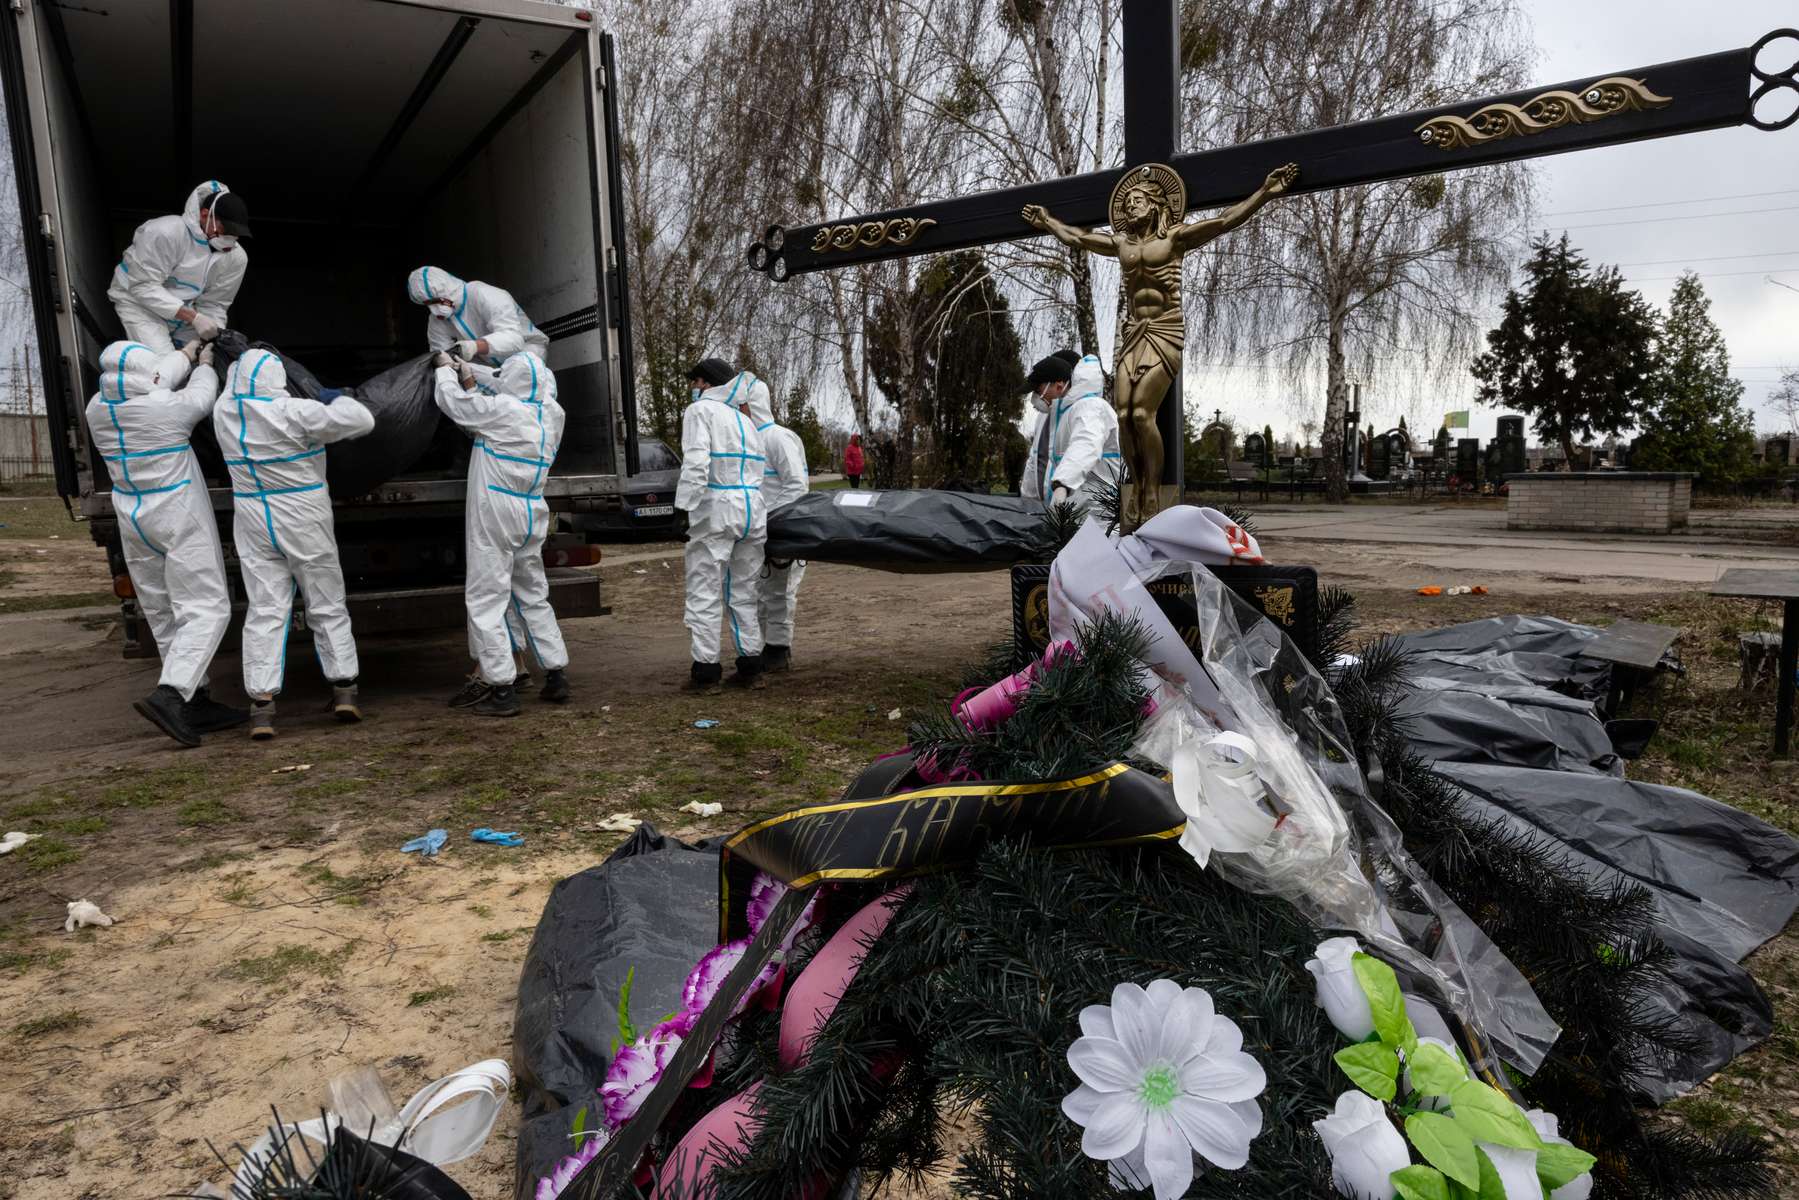 BUCHA : Workers in protective suits take dozens of bodies to the morgue from the Bucha cemetery for forensic examination and eventual burial on April 12, 2022.